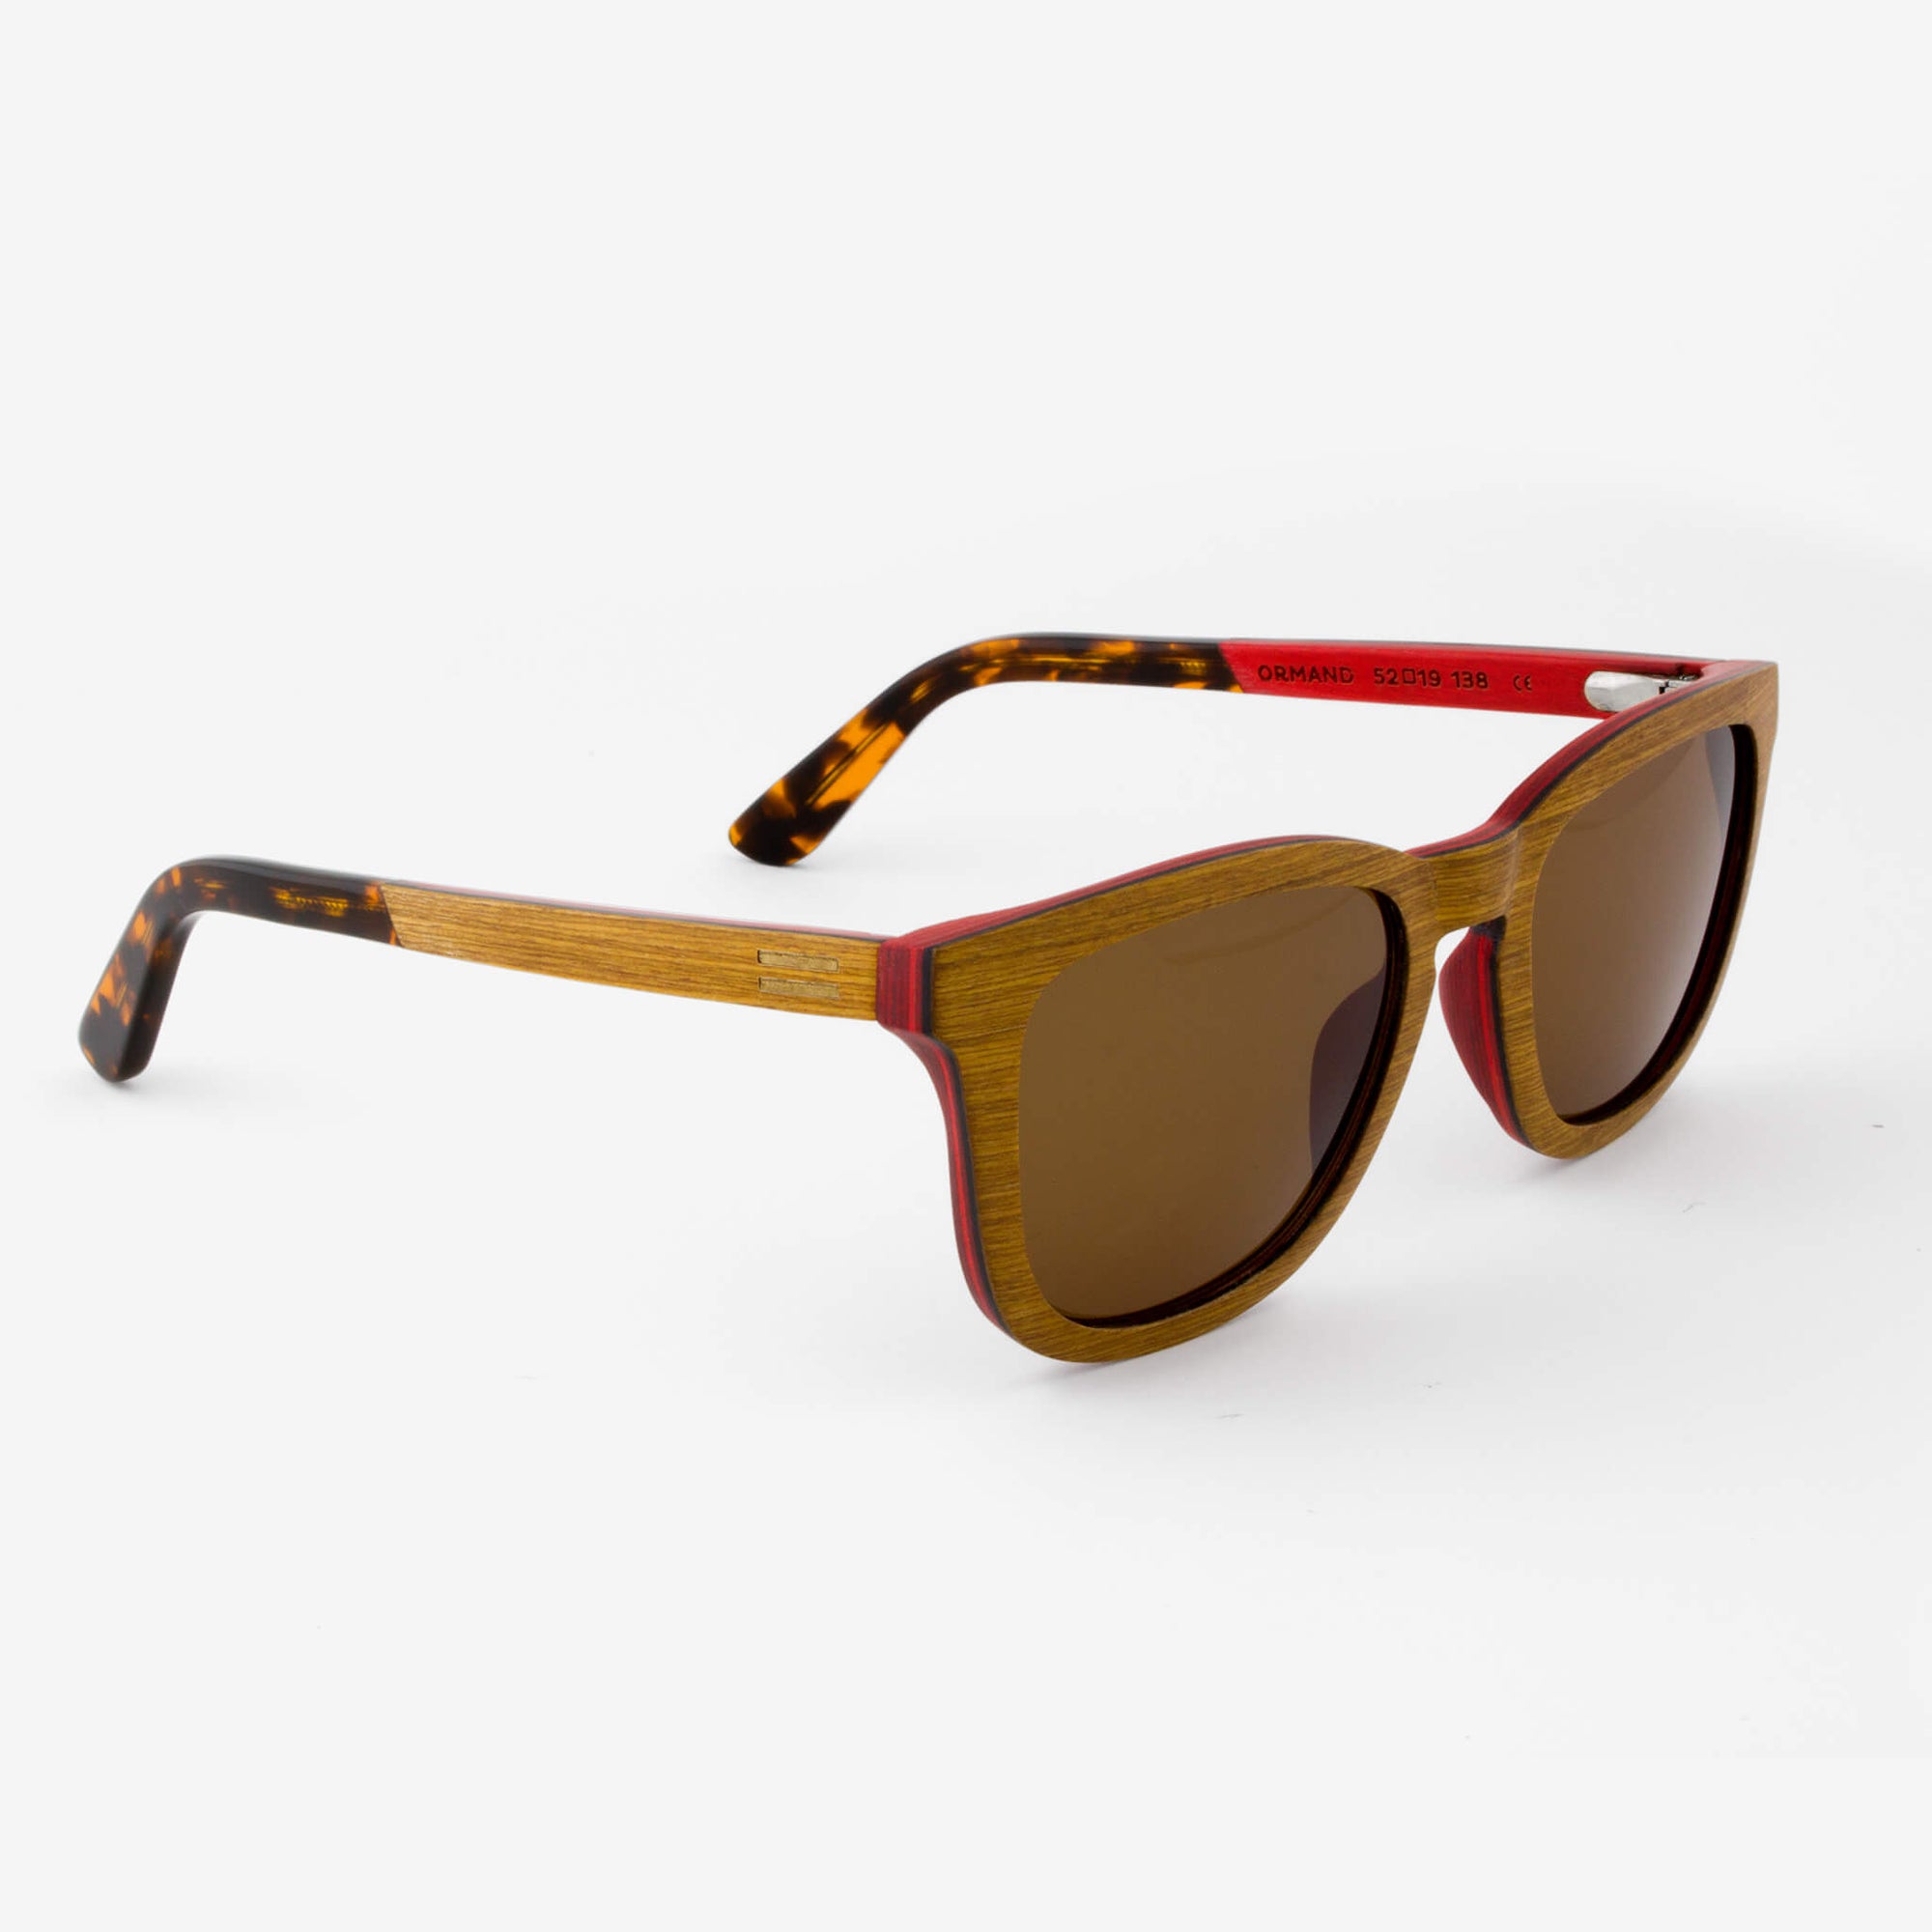 Ormand teak layered wood sunglasses with tortoise shell temples